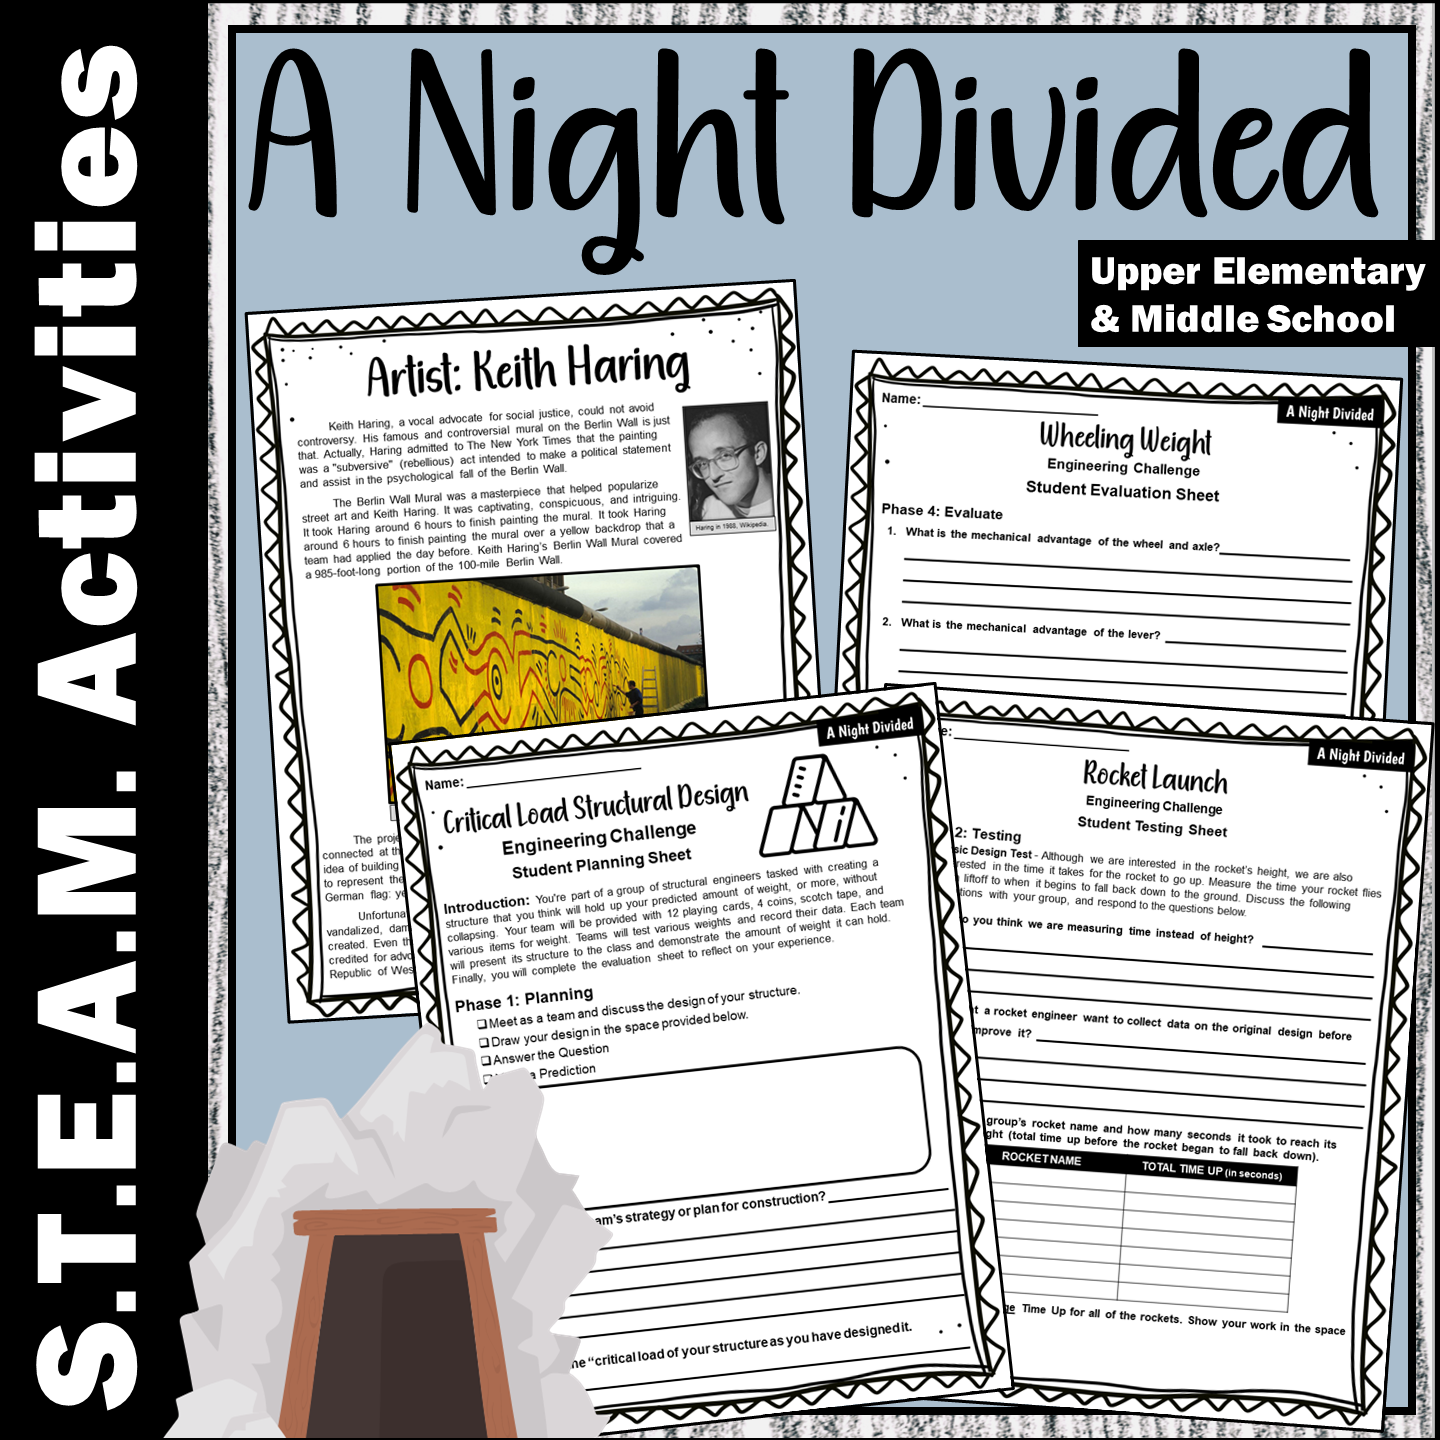 A Night Divided STEAM Based Activities